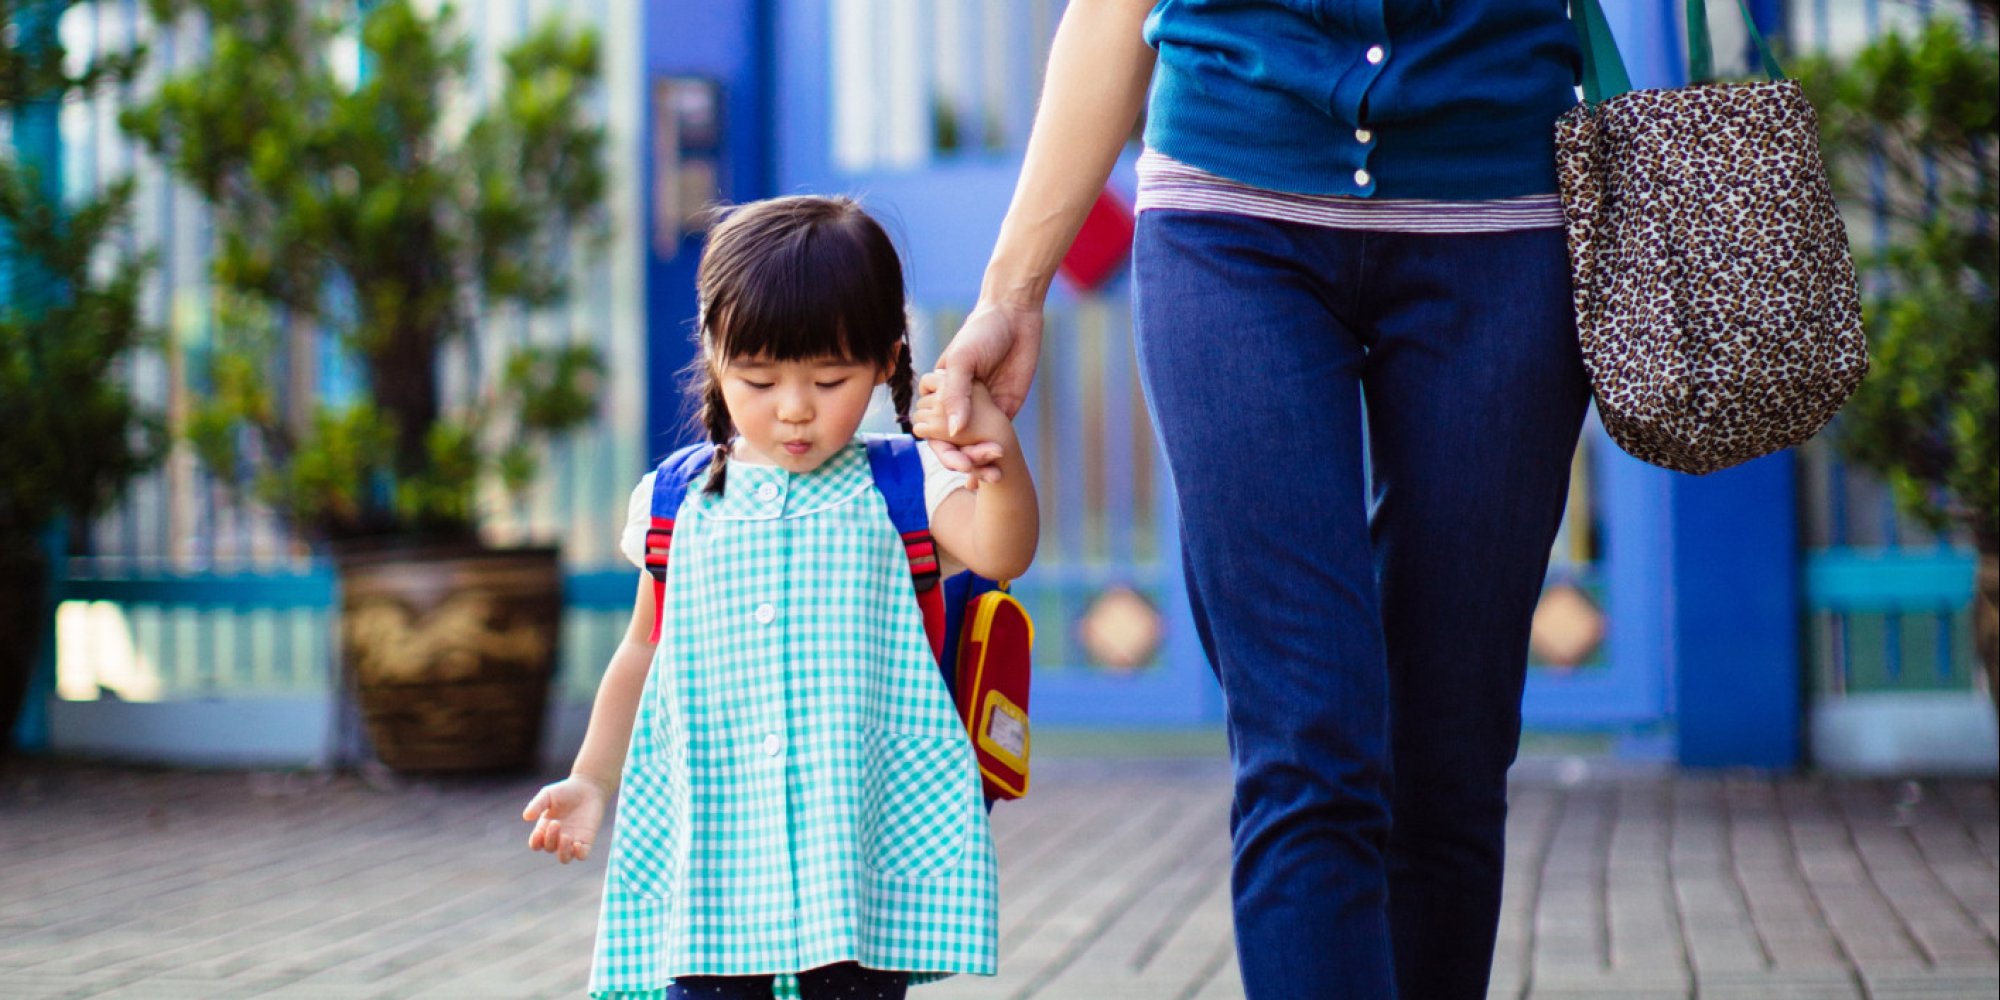 7 Types of Parents You See at Drop-Off | HuffPost